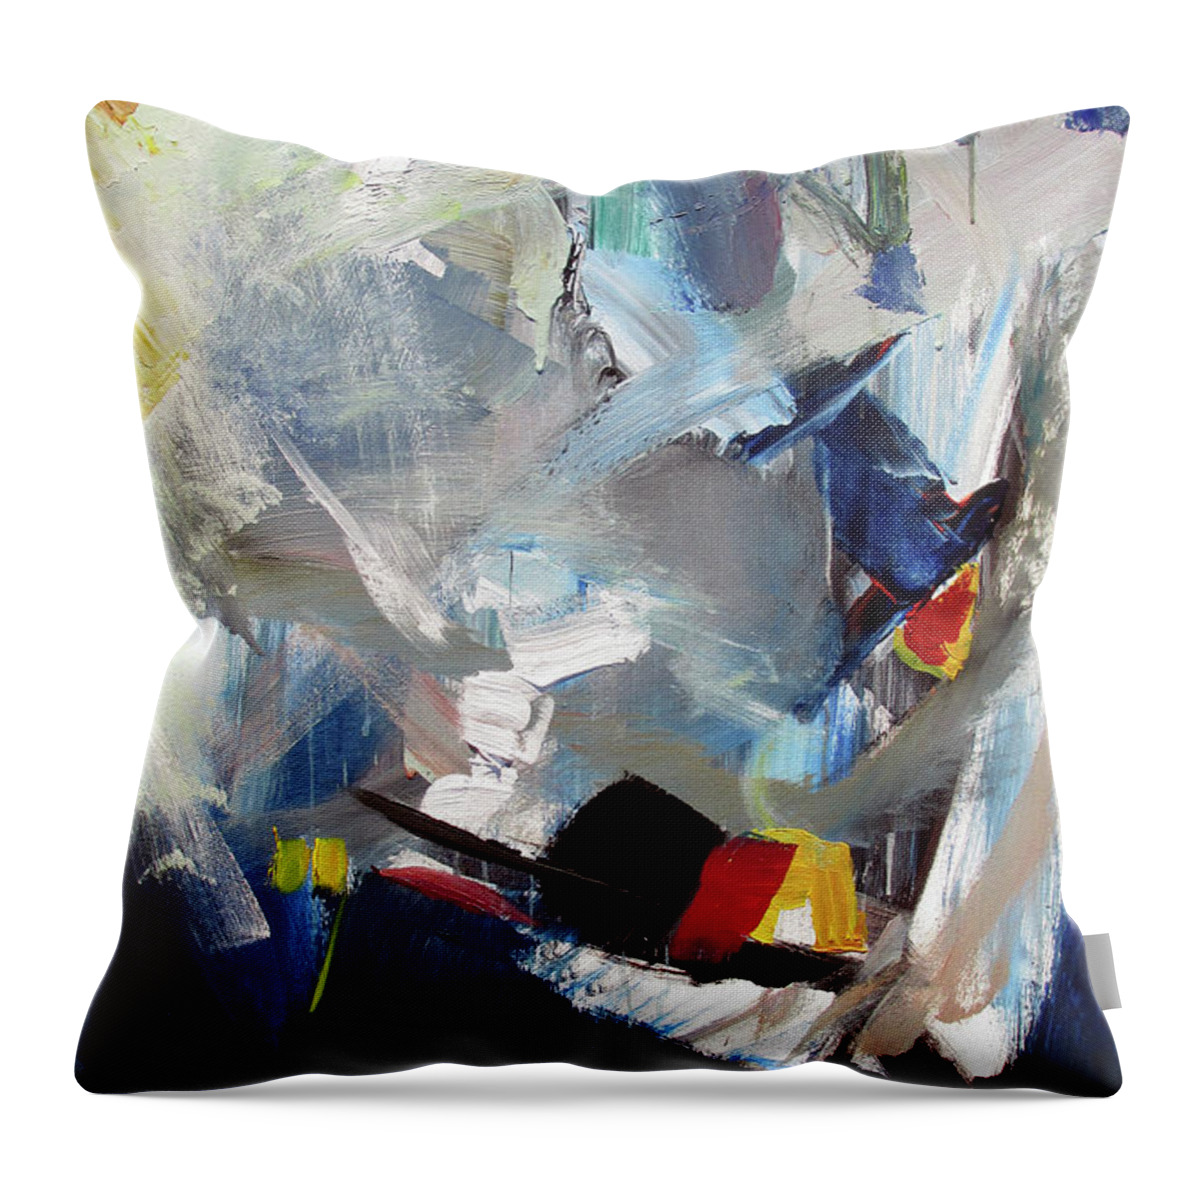  Throw Pillow featuring the painting Blue by John Gholson